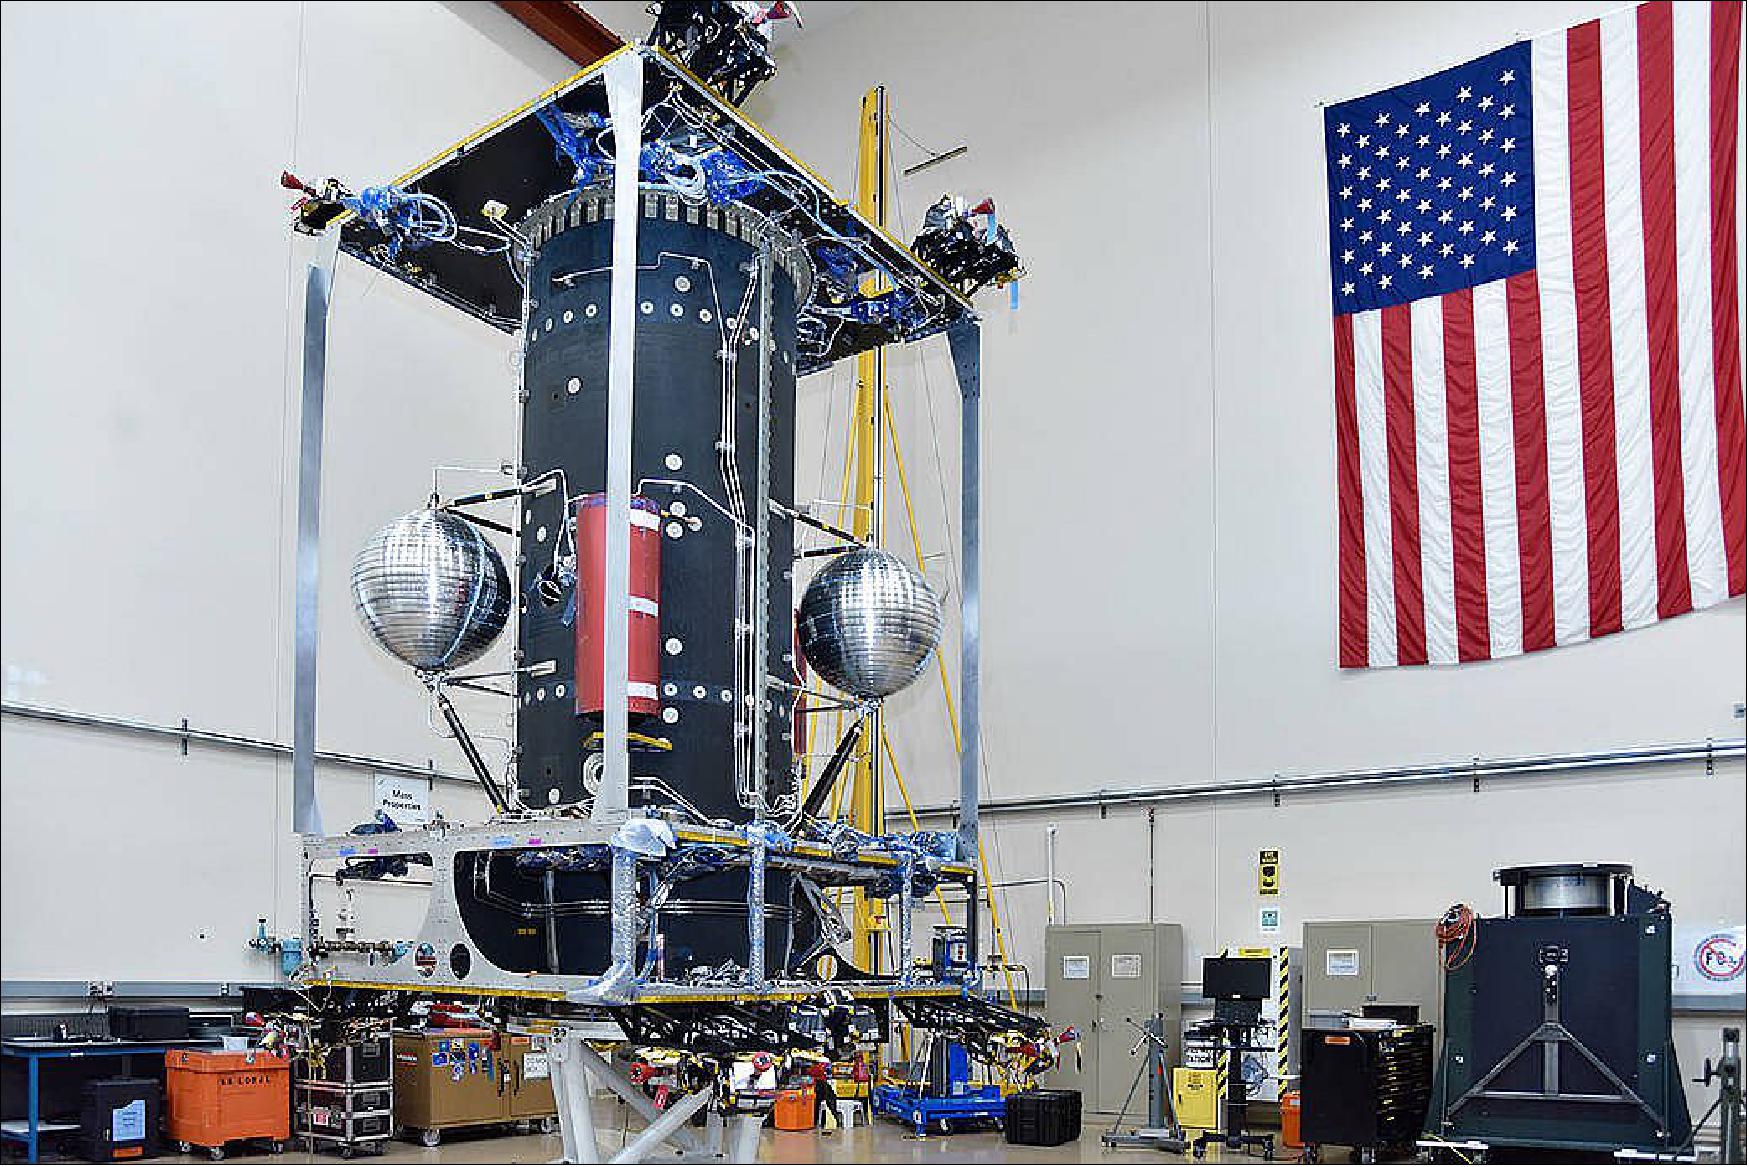 Figure 10: This image, taken by Maxar in their Palo Alto, California, facility, features the OSAM-1 spacecraft bus under development. The 14-foot-tall bus will provide OSAM-1 with power and the ability to maneuver in orbit. To make these maneuvers possible, inside the main cylinder are two large bi-propellant tanks, and the upper and lower deck of the spacecraft feature thrusters. The two silver spheres are filled with mono-propellant fuel that will be used to provide OSAM-1's target client satellite, Landsat 7, with more fuel to demonstrate that robotically refueling a satellite is possible (image credit: Maxar Technologies)